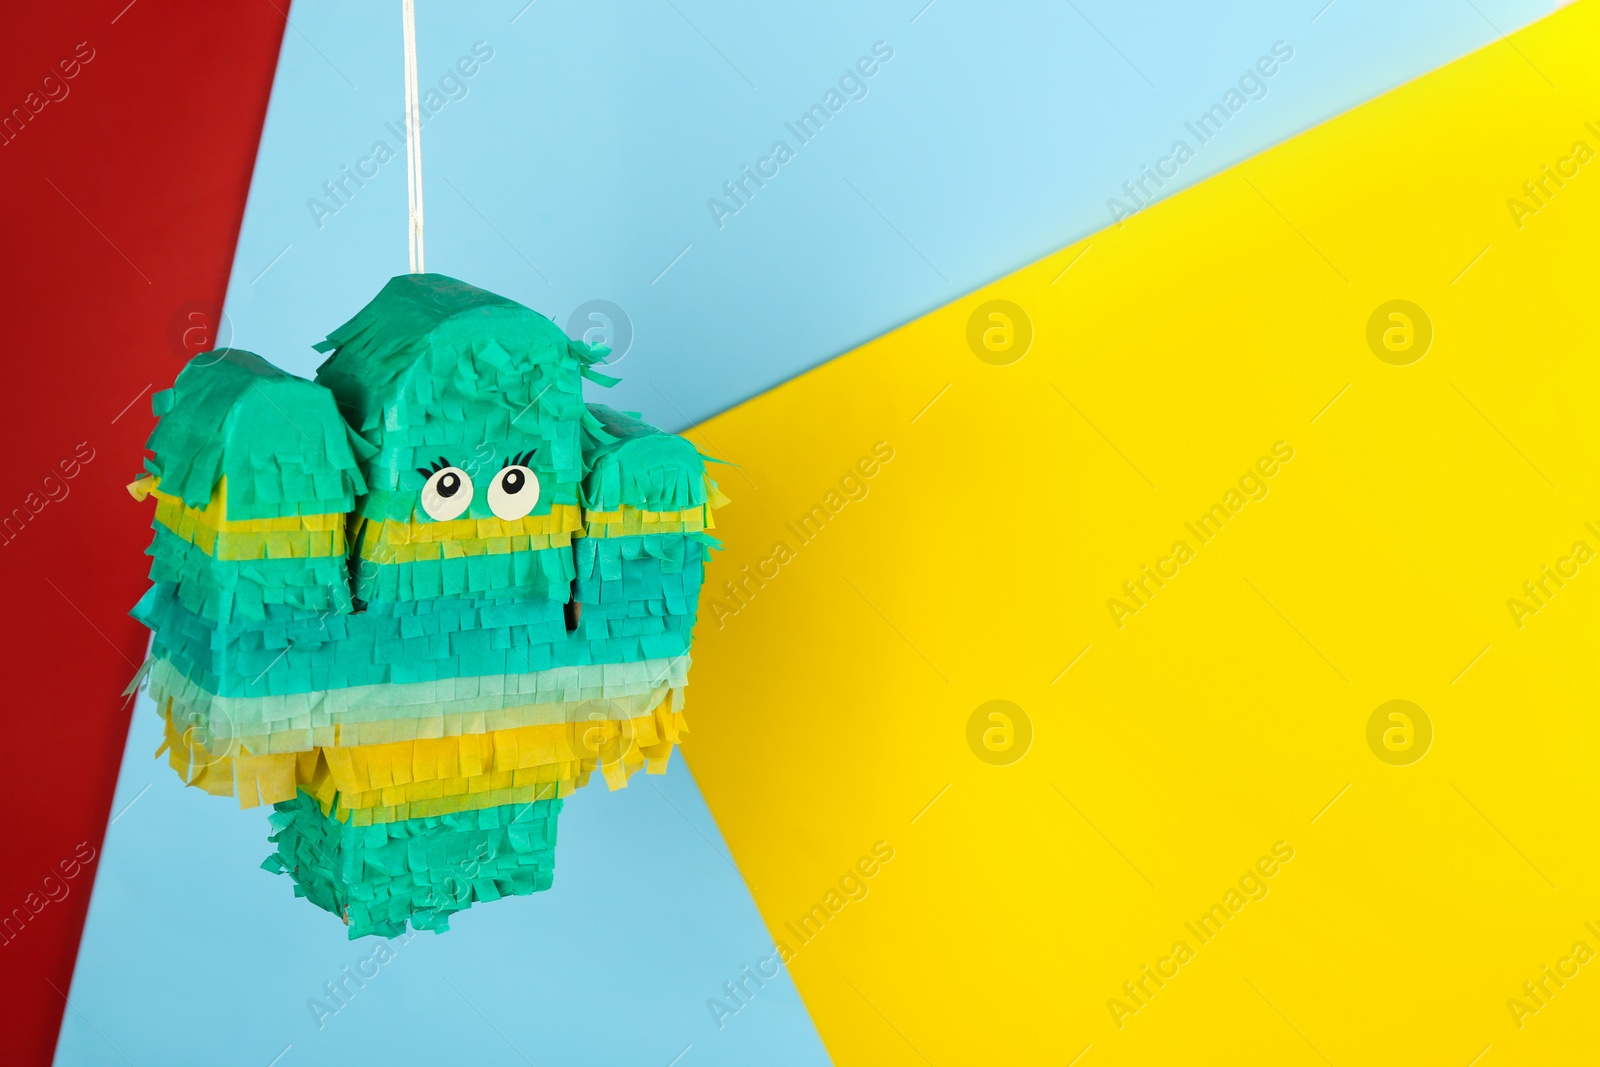 Photo of Cactus shaped pinata hanging on color background. Space for text